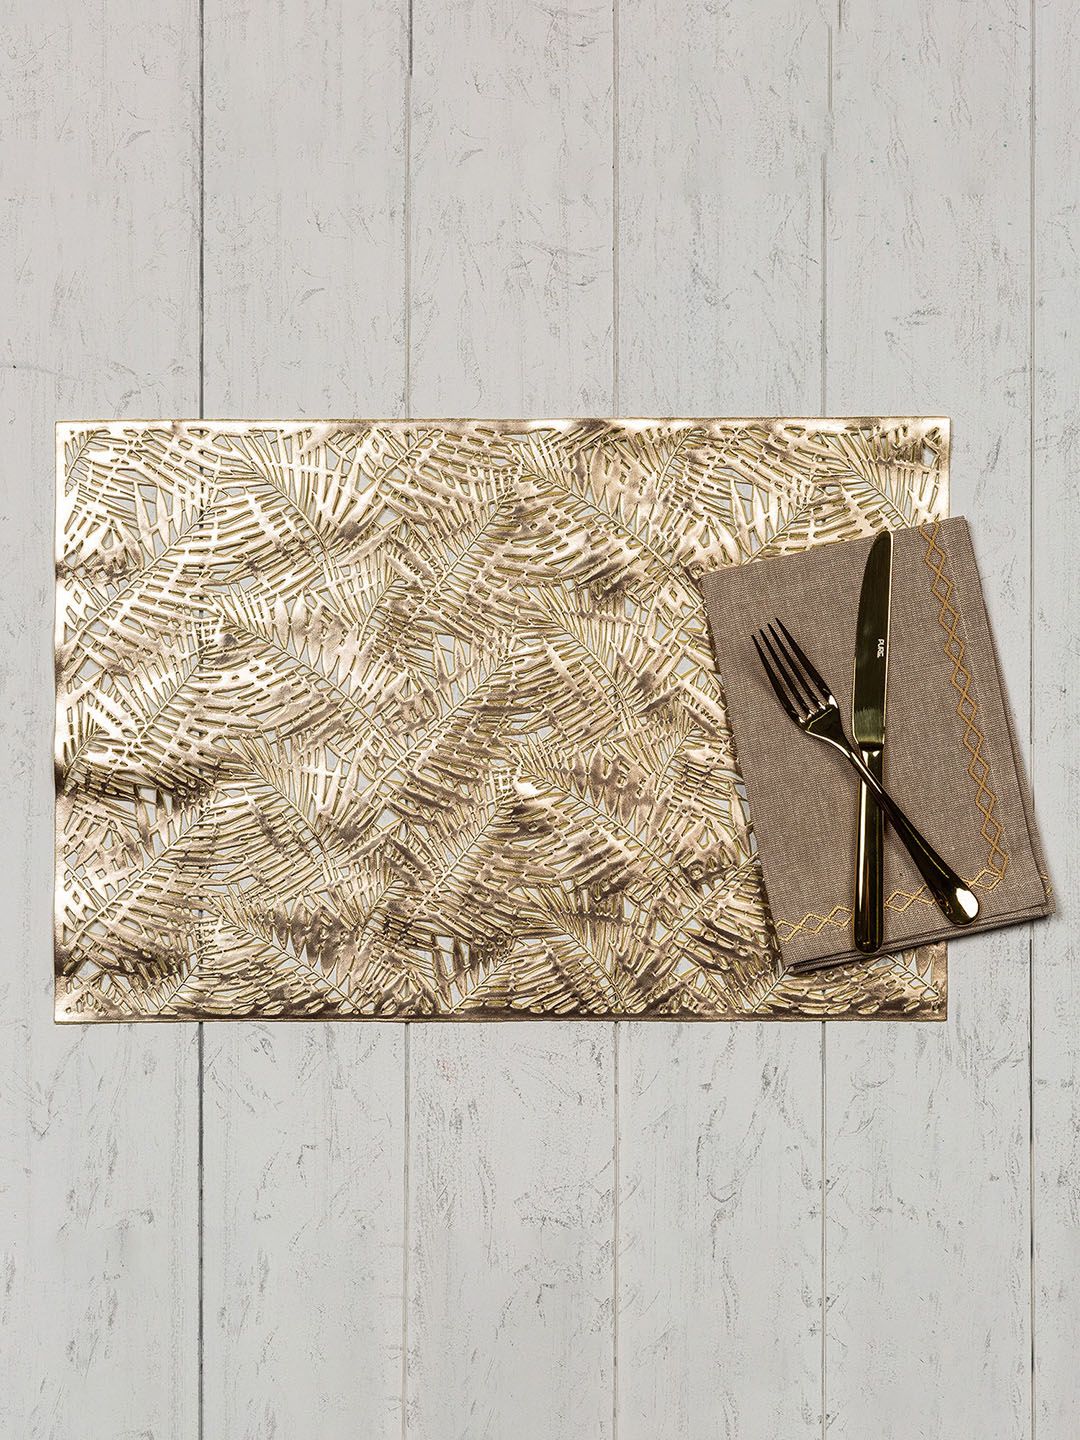 Pure Home and Living Set Of 6 Gold-Coloured Textured Rectangular Leaf Table Placemats Price in India